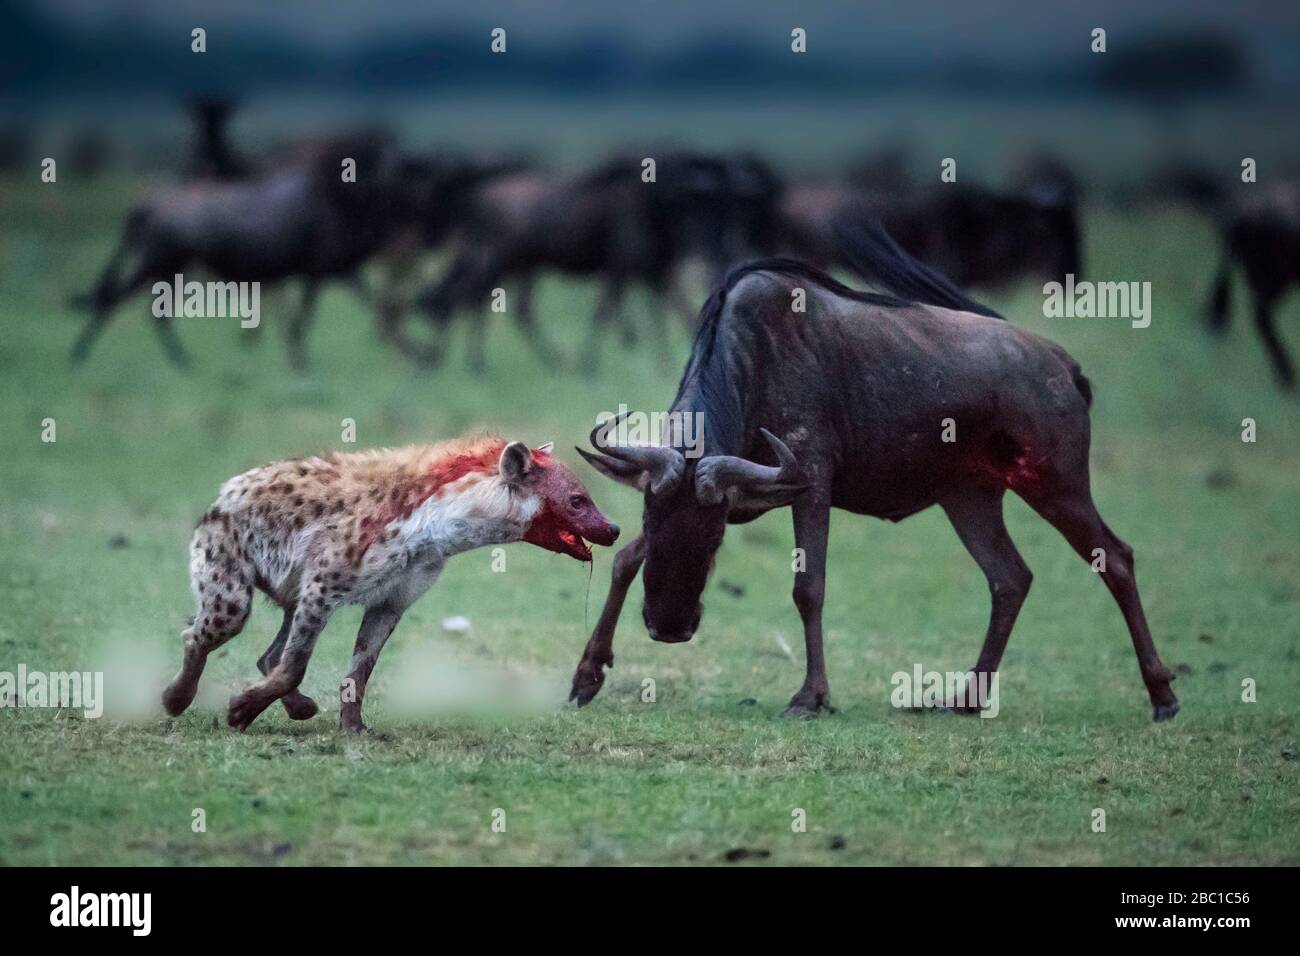 Remarkably, the wildebeest rallied for one last attempt to fight off its deadly attacker. KENYA: PHOTOGRAPHER captures the animal kingdom?s David and Stock Photo